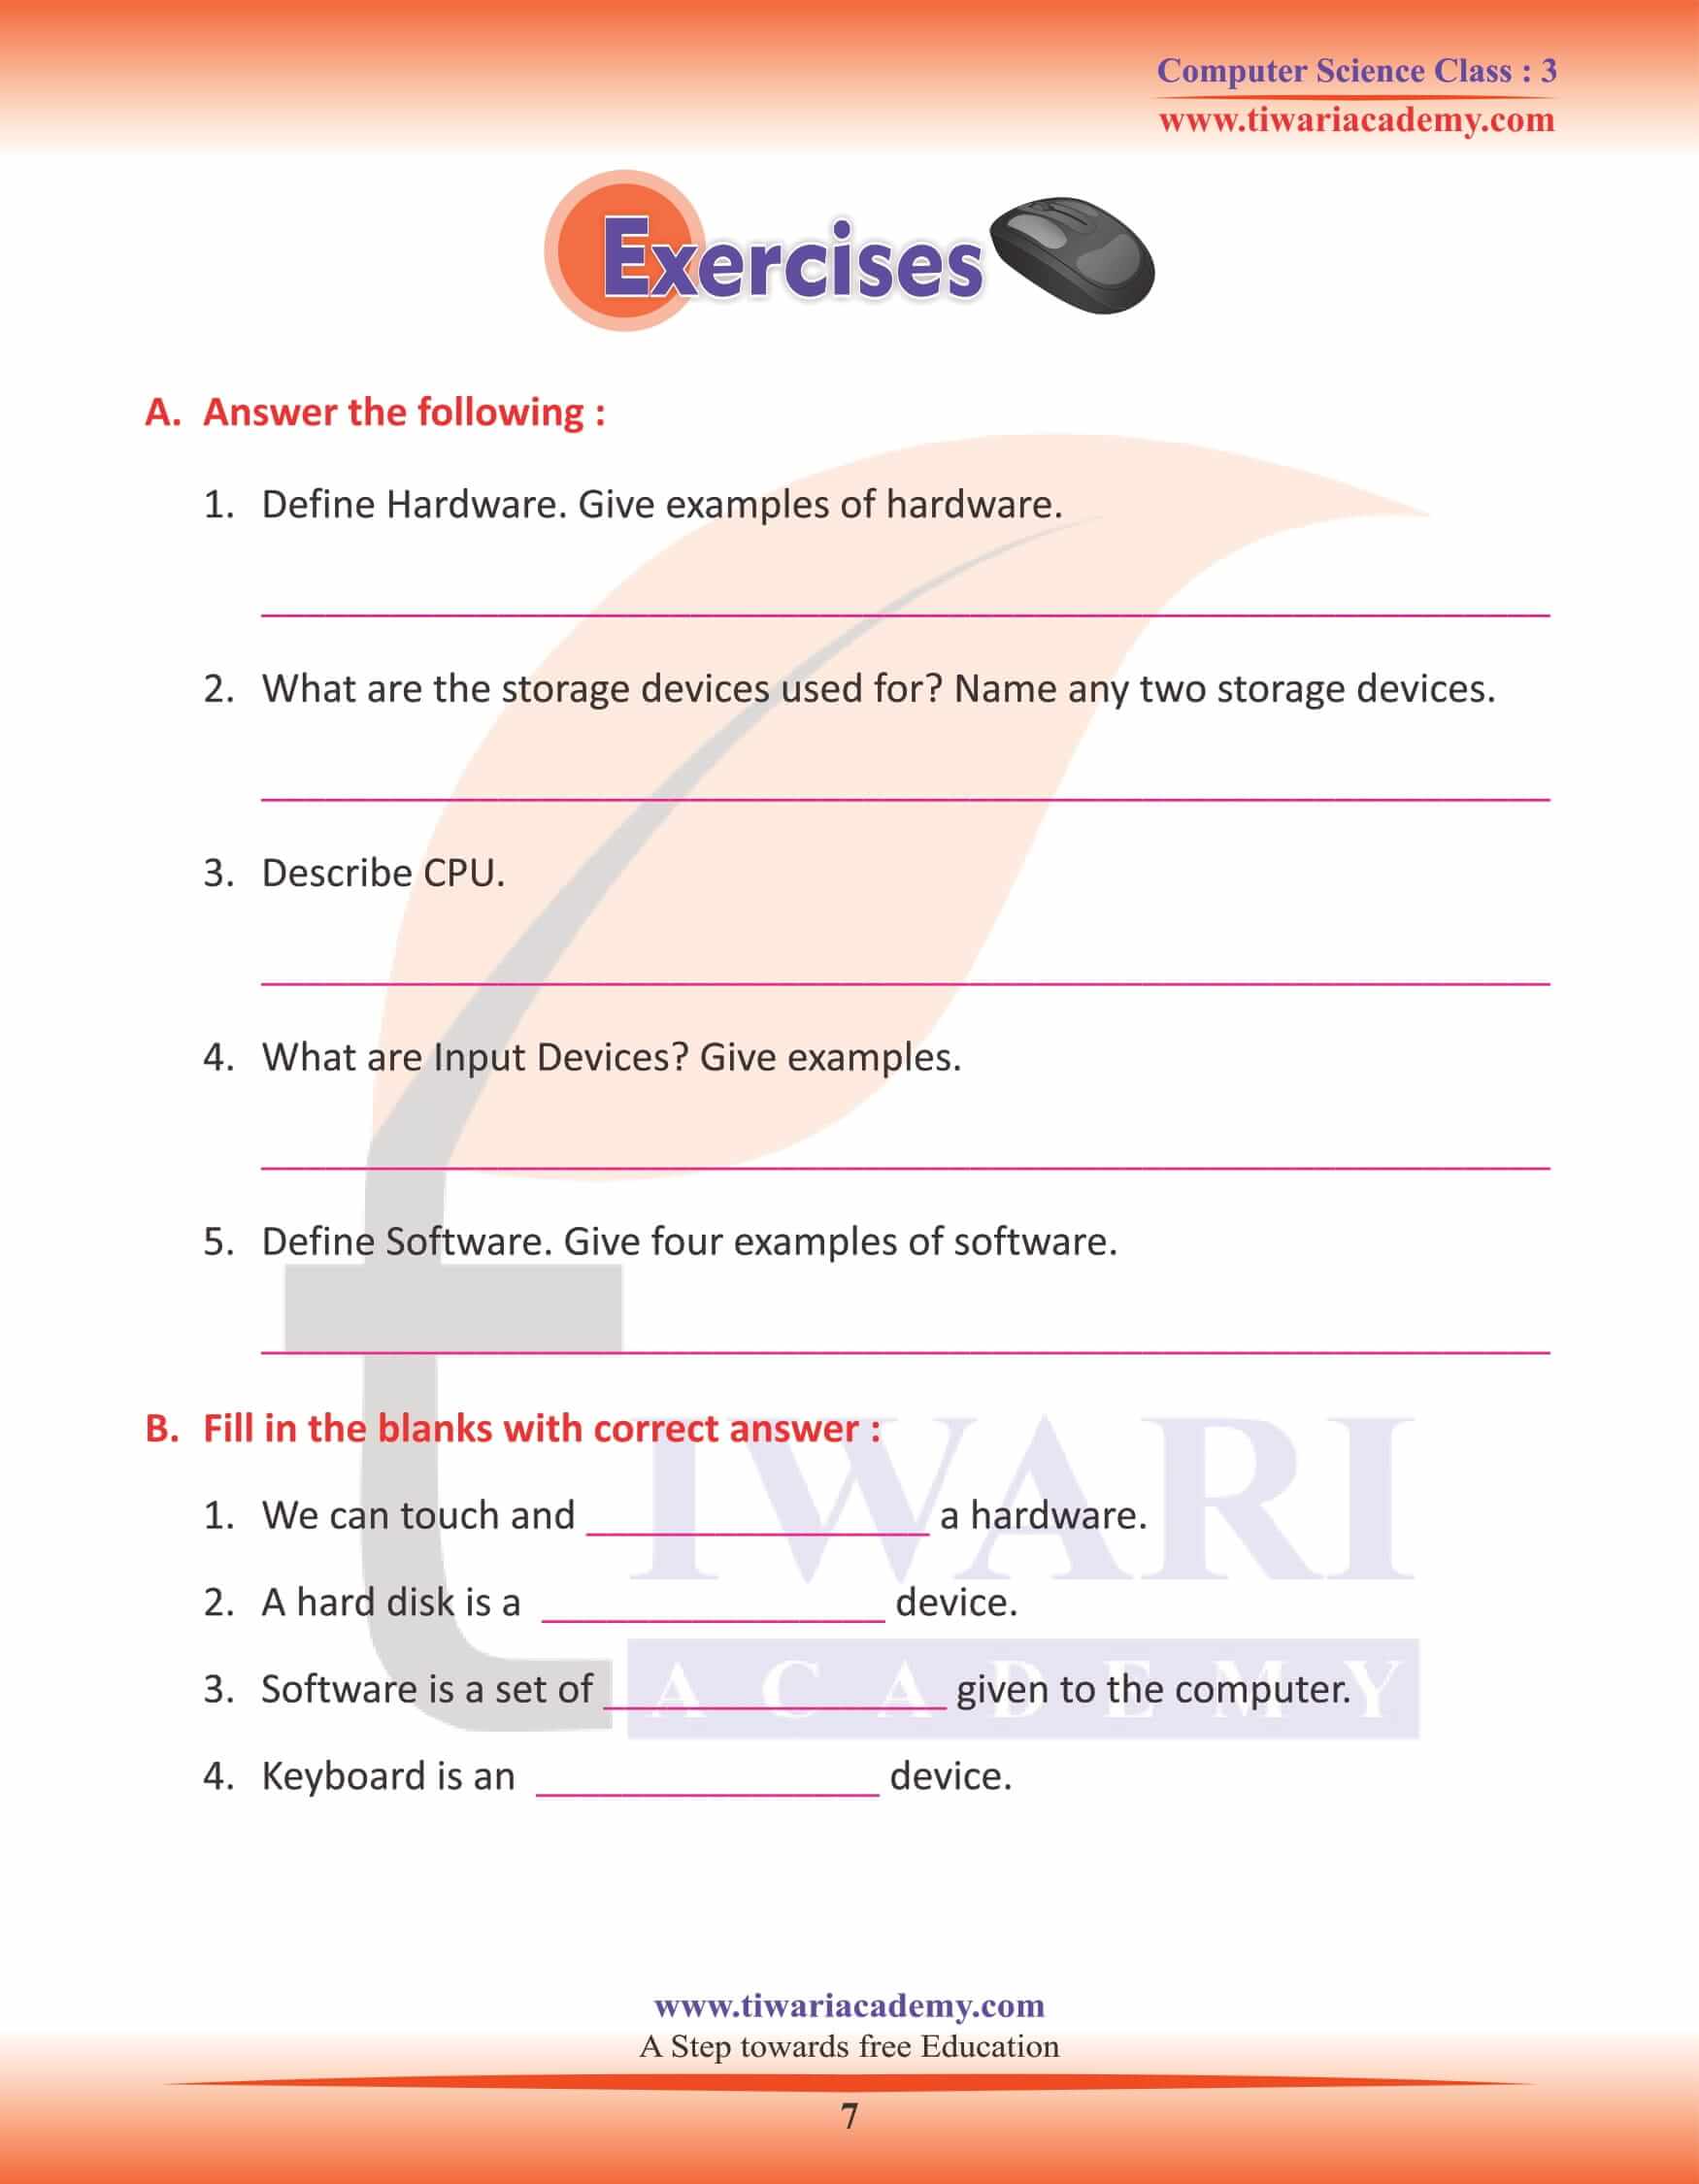 NCERT Solutions for Class 3 Computer Science Chapter 2 Worksheet